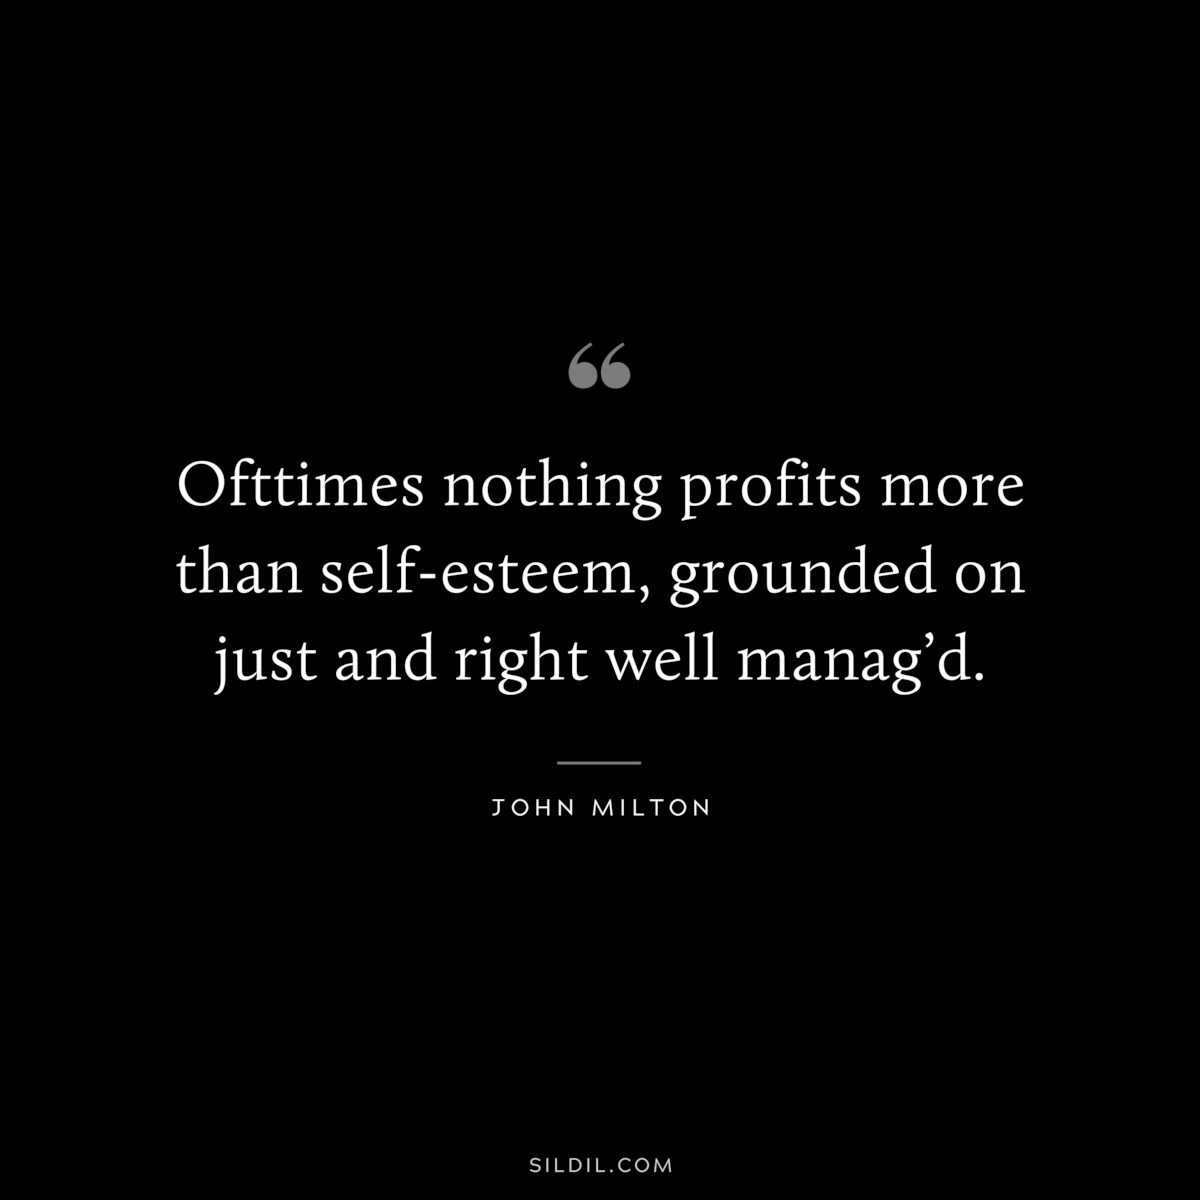 Ofttimes nothing profits more than self-esteem, grounded on just and right well manag’d. ― John Milton